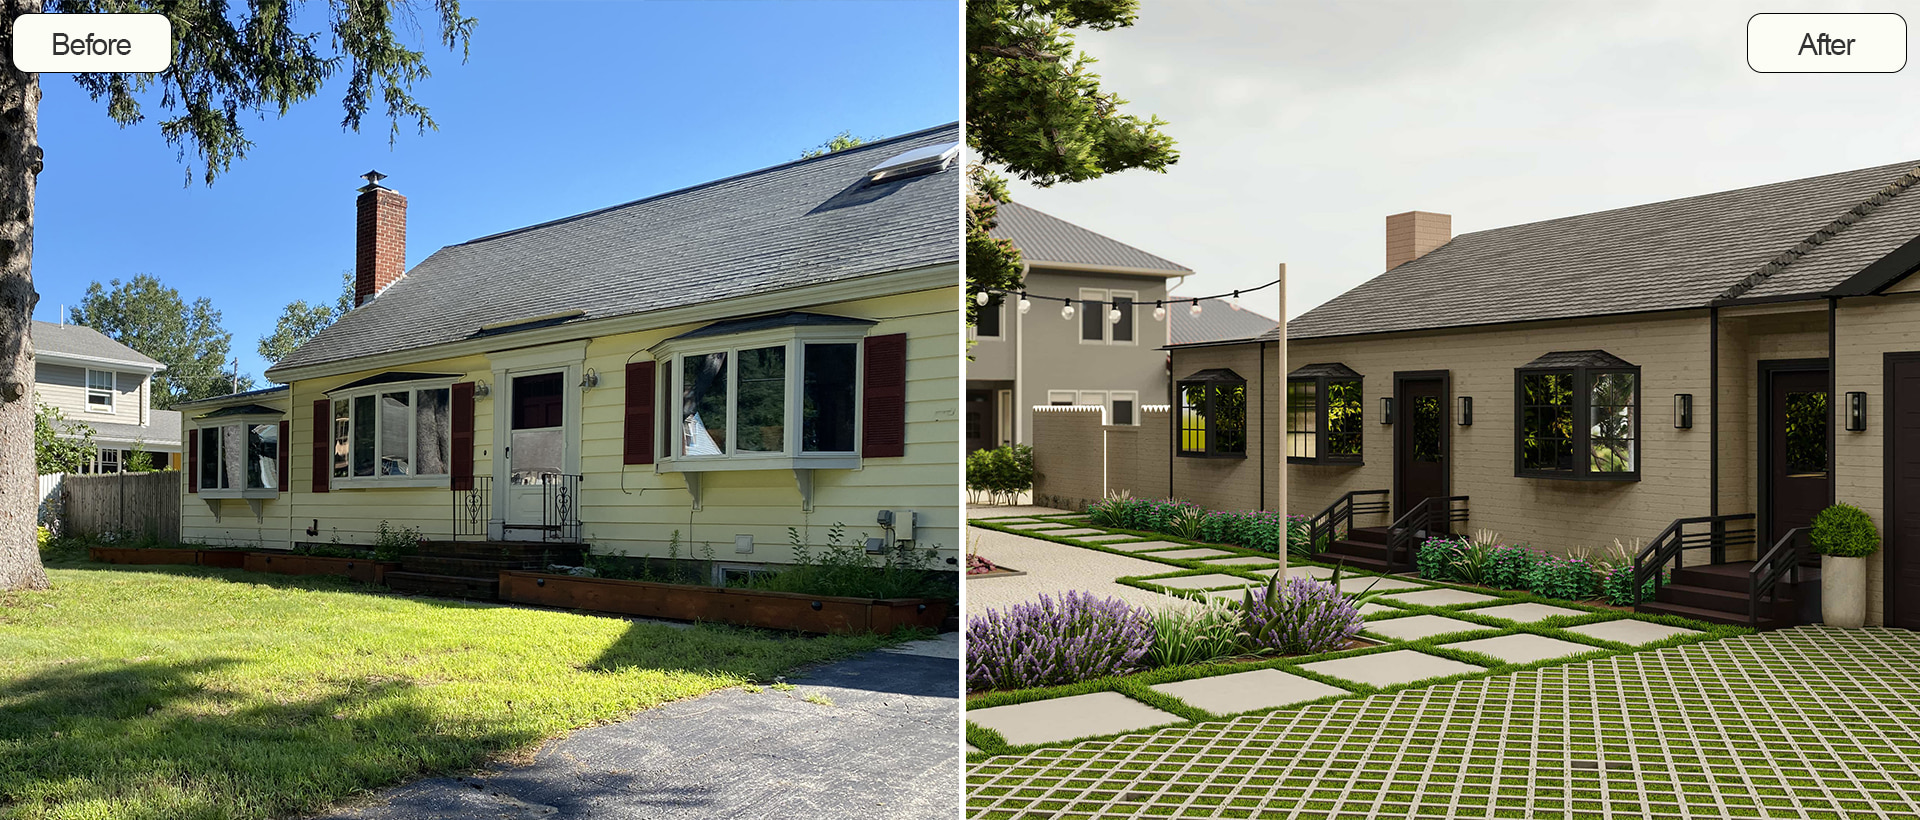 Before and After Transformation of Home Exterior with Enhanced Curb Appeal